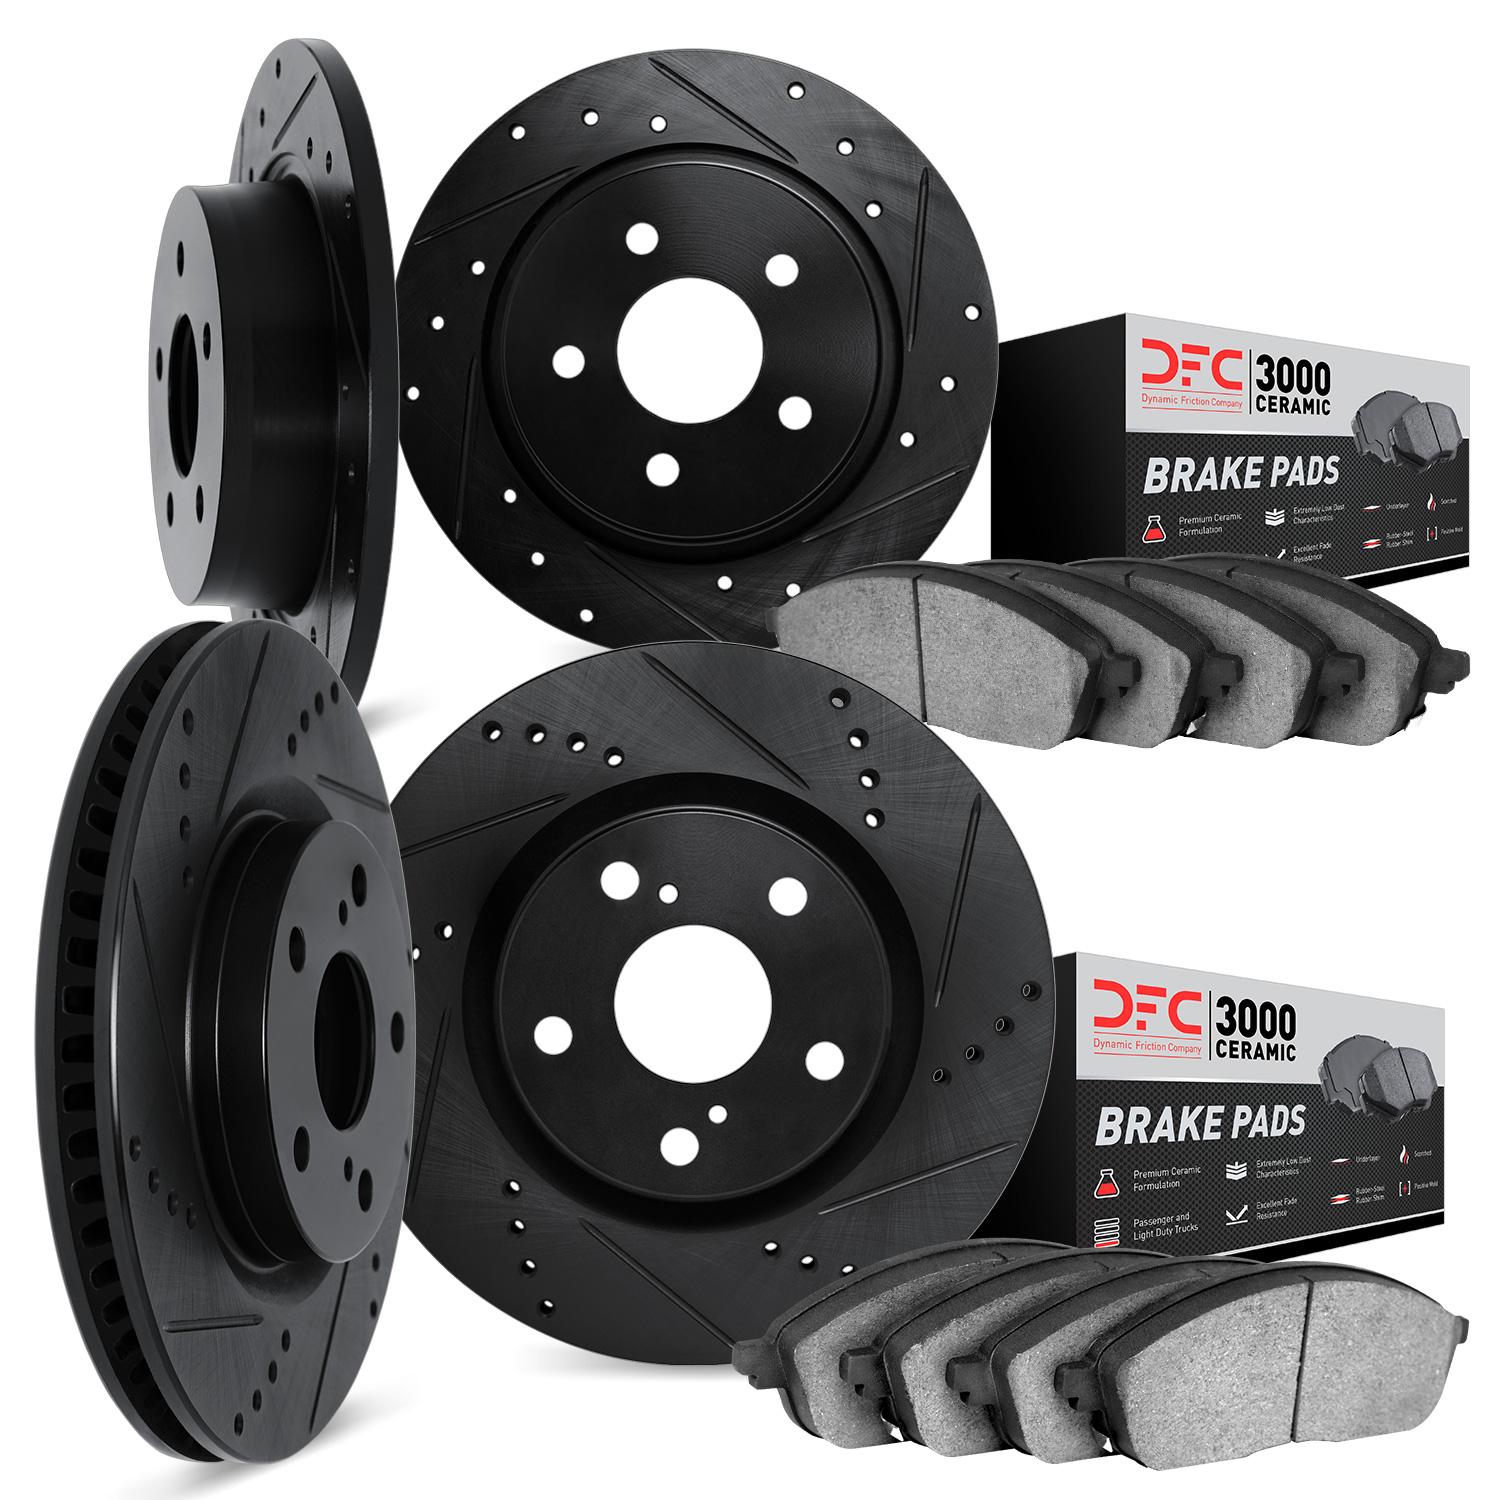 8304-58012 Drilled/Slotted Brake Rotors with 3000-Series Ceramic Brake Pads Kit [Black], 2002-2004 Acura/Honda, Position: Front